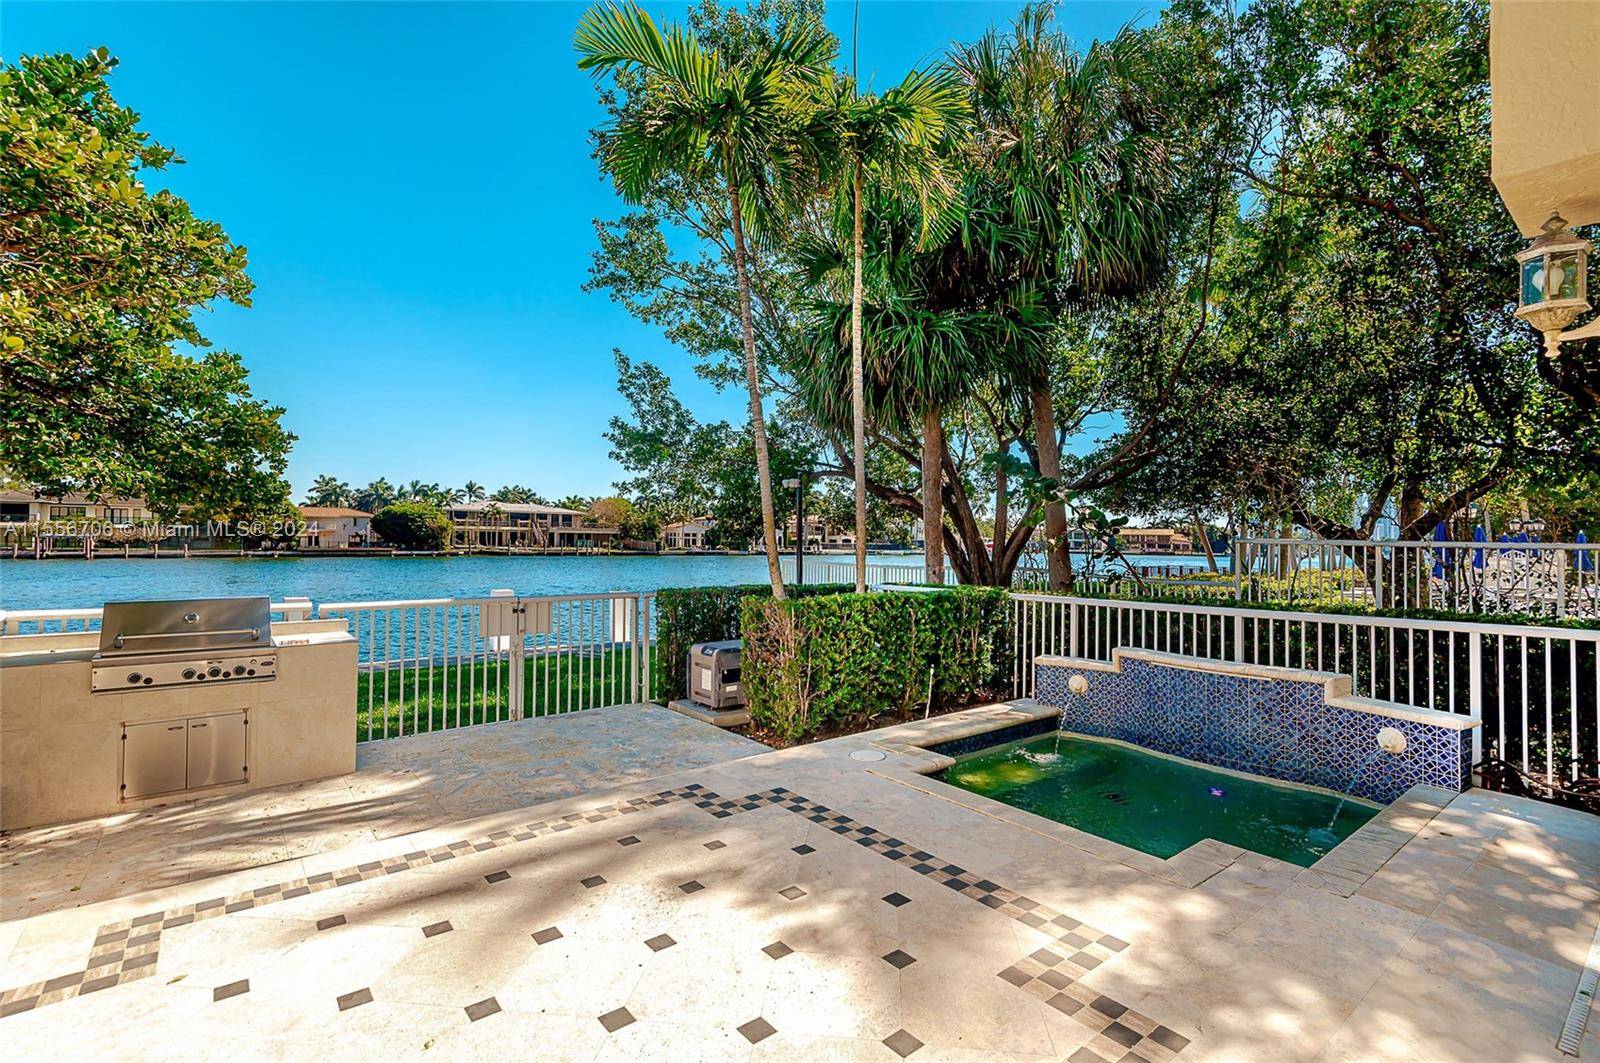 Corner unit, directly on the Intracoastal waterway with fantastic views, deeded boat dock, the unit has the largest driveway that can fit at least 8 cars plus 2 car garage.